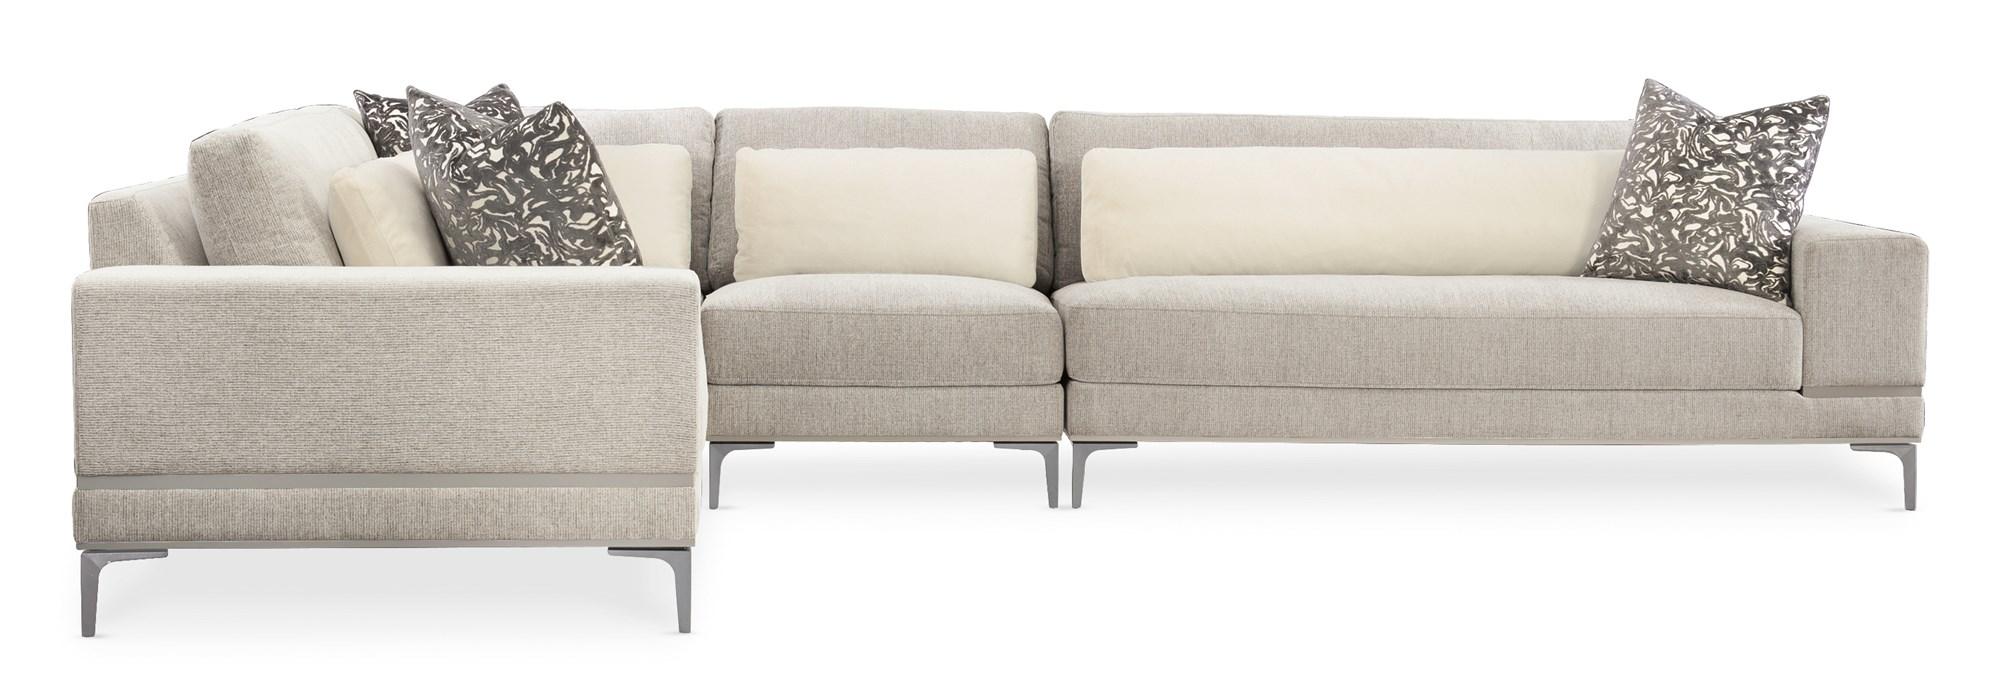 Contemporary Sectional Sofa REPETITION REPETITION-SEC-4PC in Gray Fabric